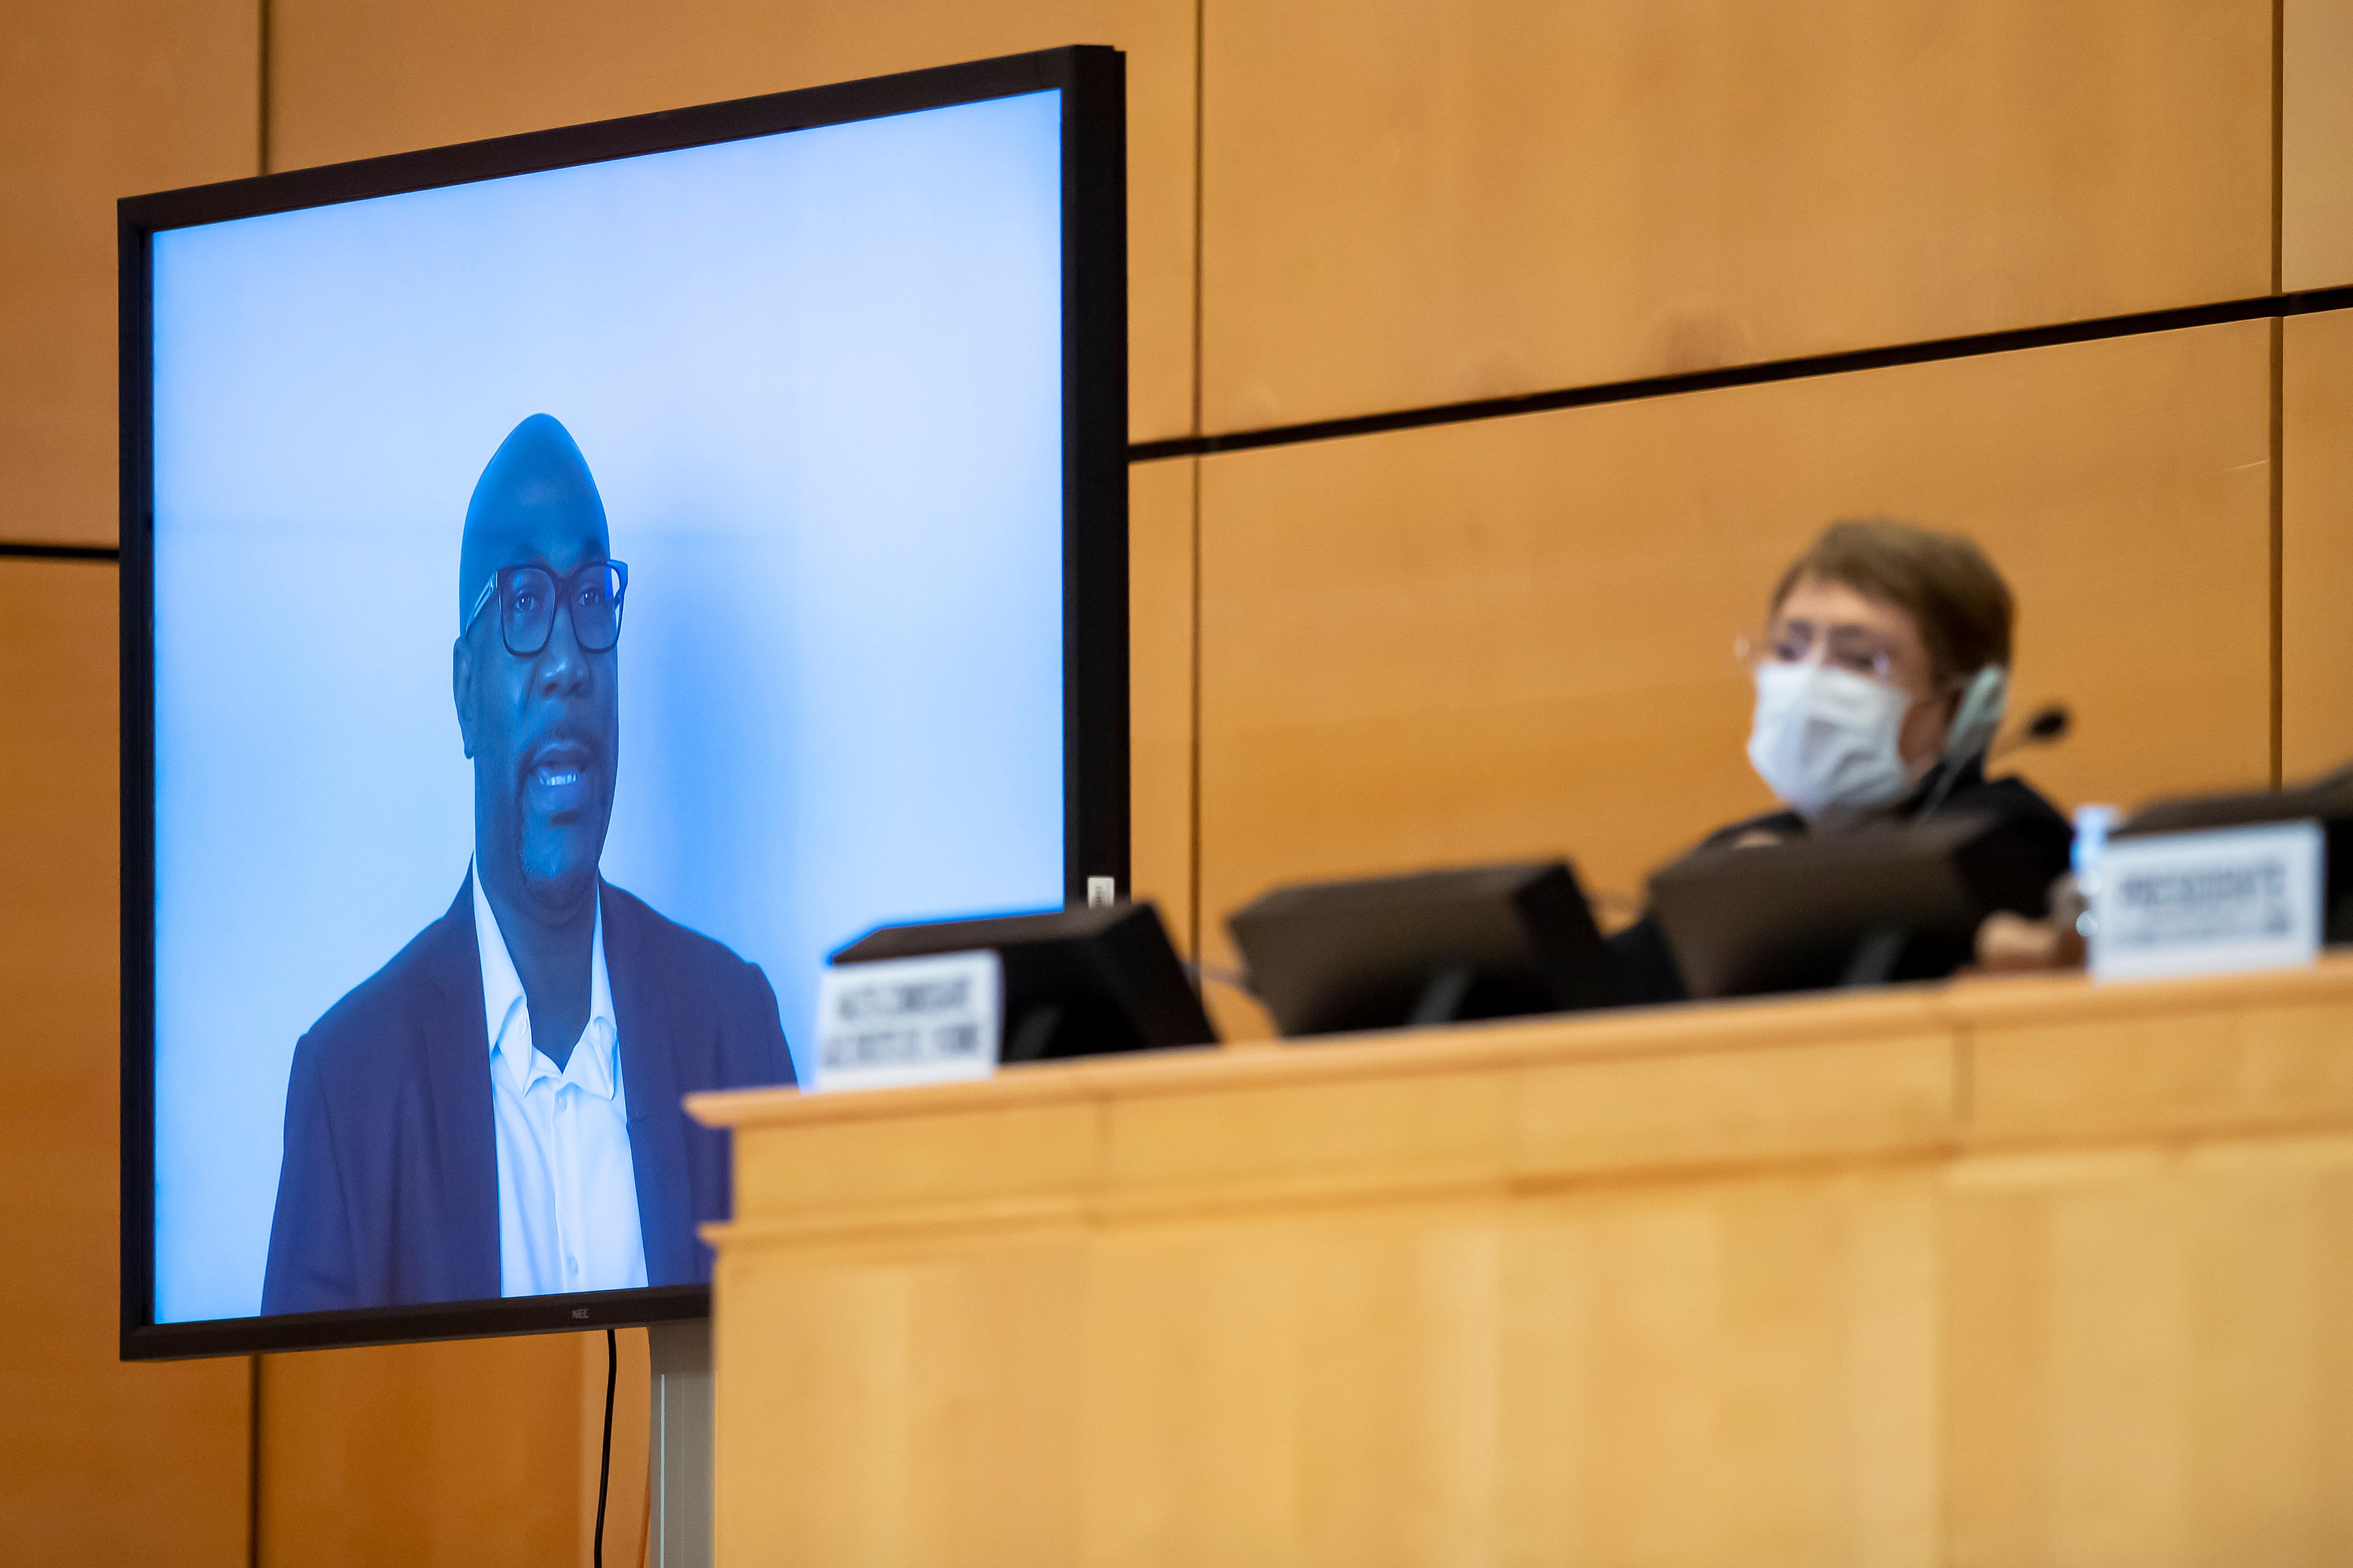 United Nations High Commissioner for Human Rights Michelle Bachelet looks on next to a TV screen showing George Floyd's brother, Philonise Floyd speaking via video message during an urgent debate on "systemic racism" in the United States and beyond at the Human Rights Council on June 17, 2020 in Geneva. (Photo: Martial Trezzini/Pool/AFP via Getty Images)